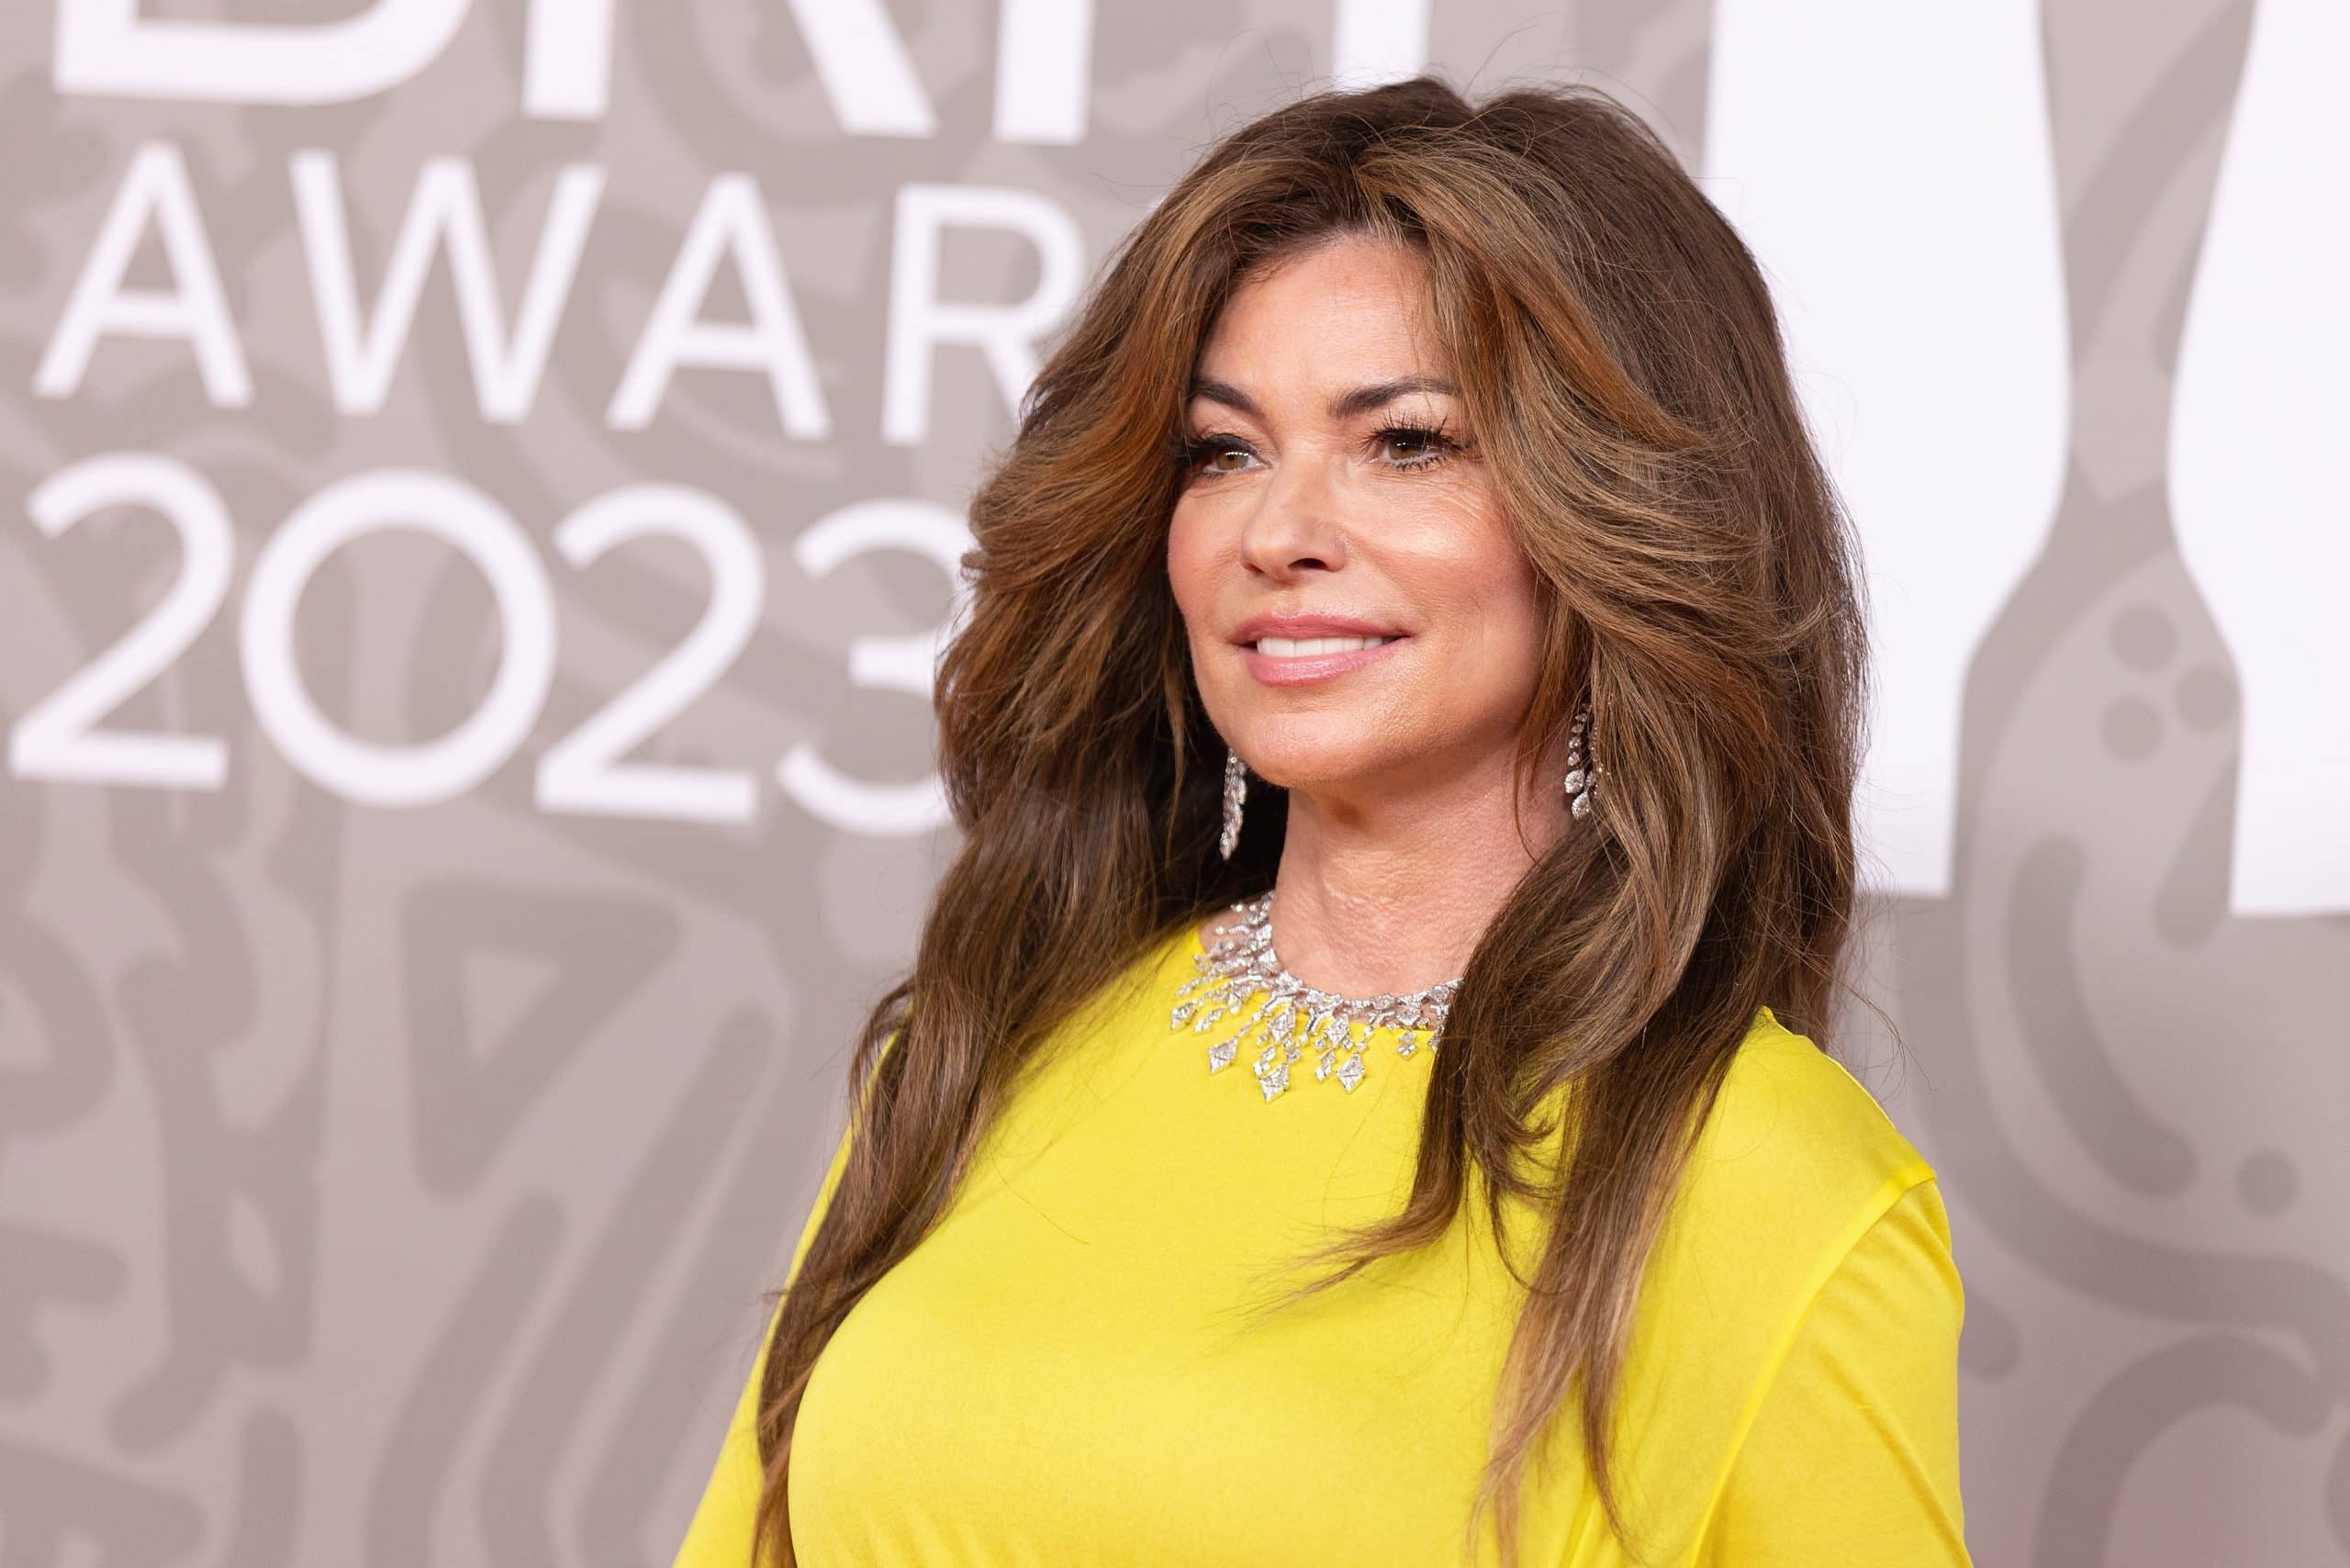 Shania Twain stepped up to offer advice to Jon Bon Jovi when he underwent vocal cord surgery